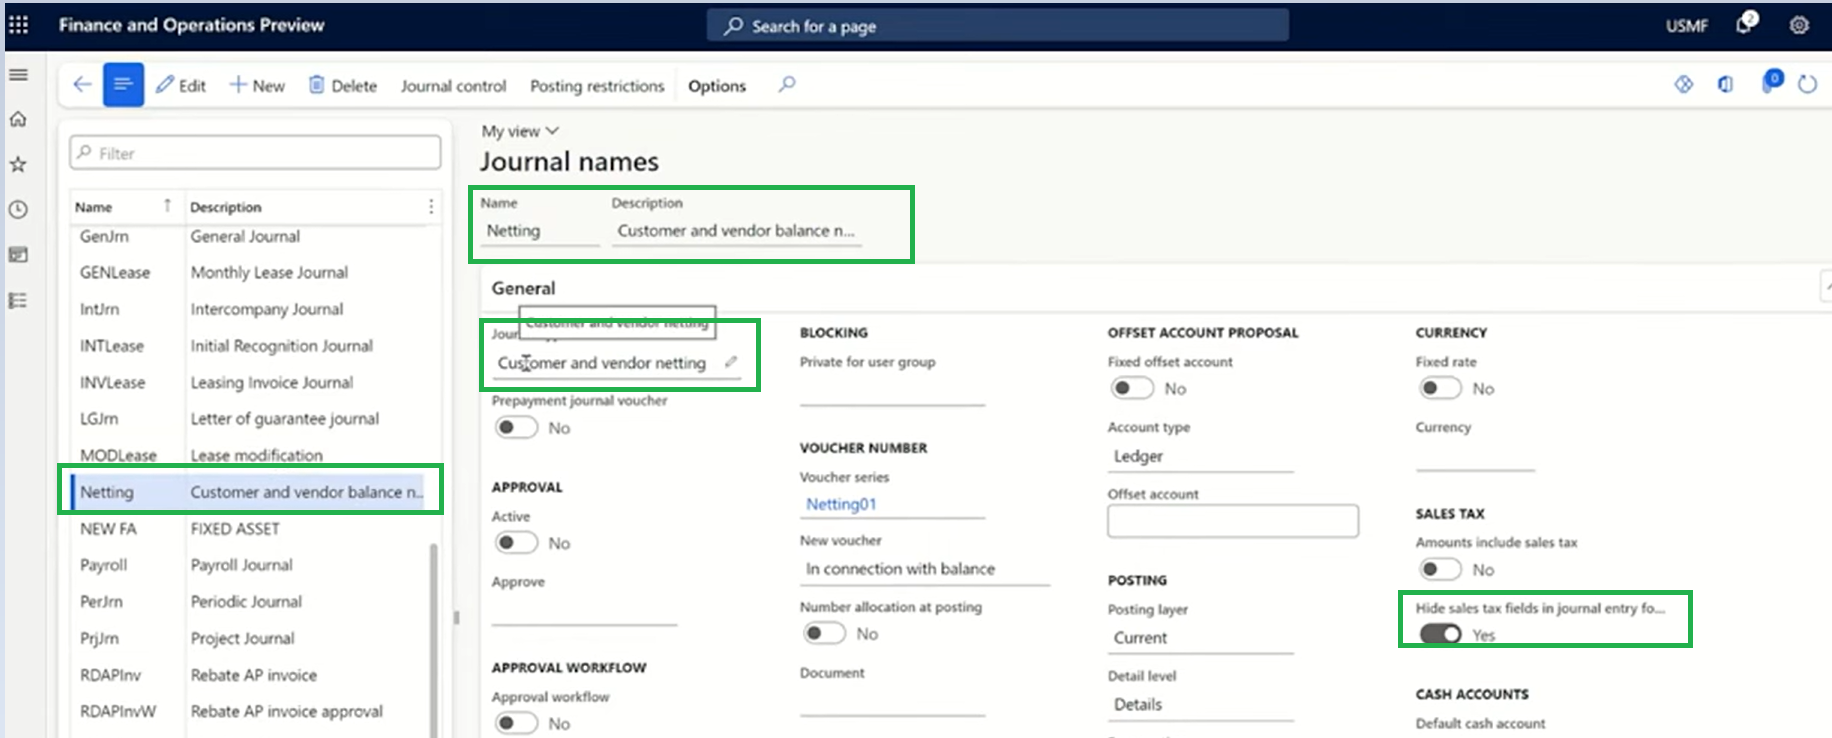 Customer and vendor balances netting for Dynamics 365 Finance and operations.